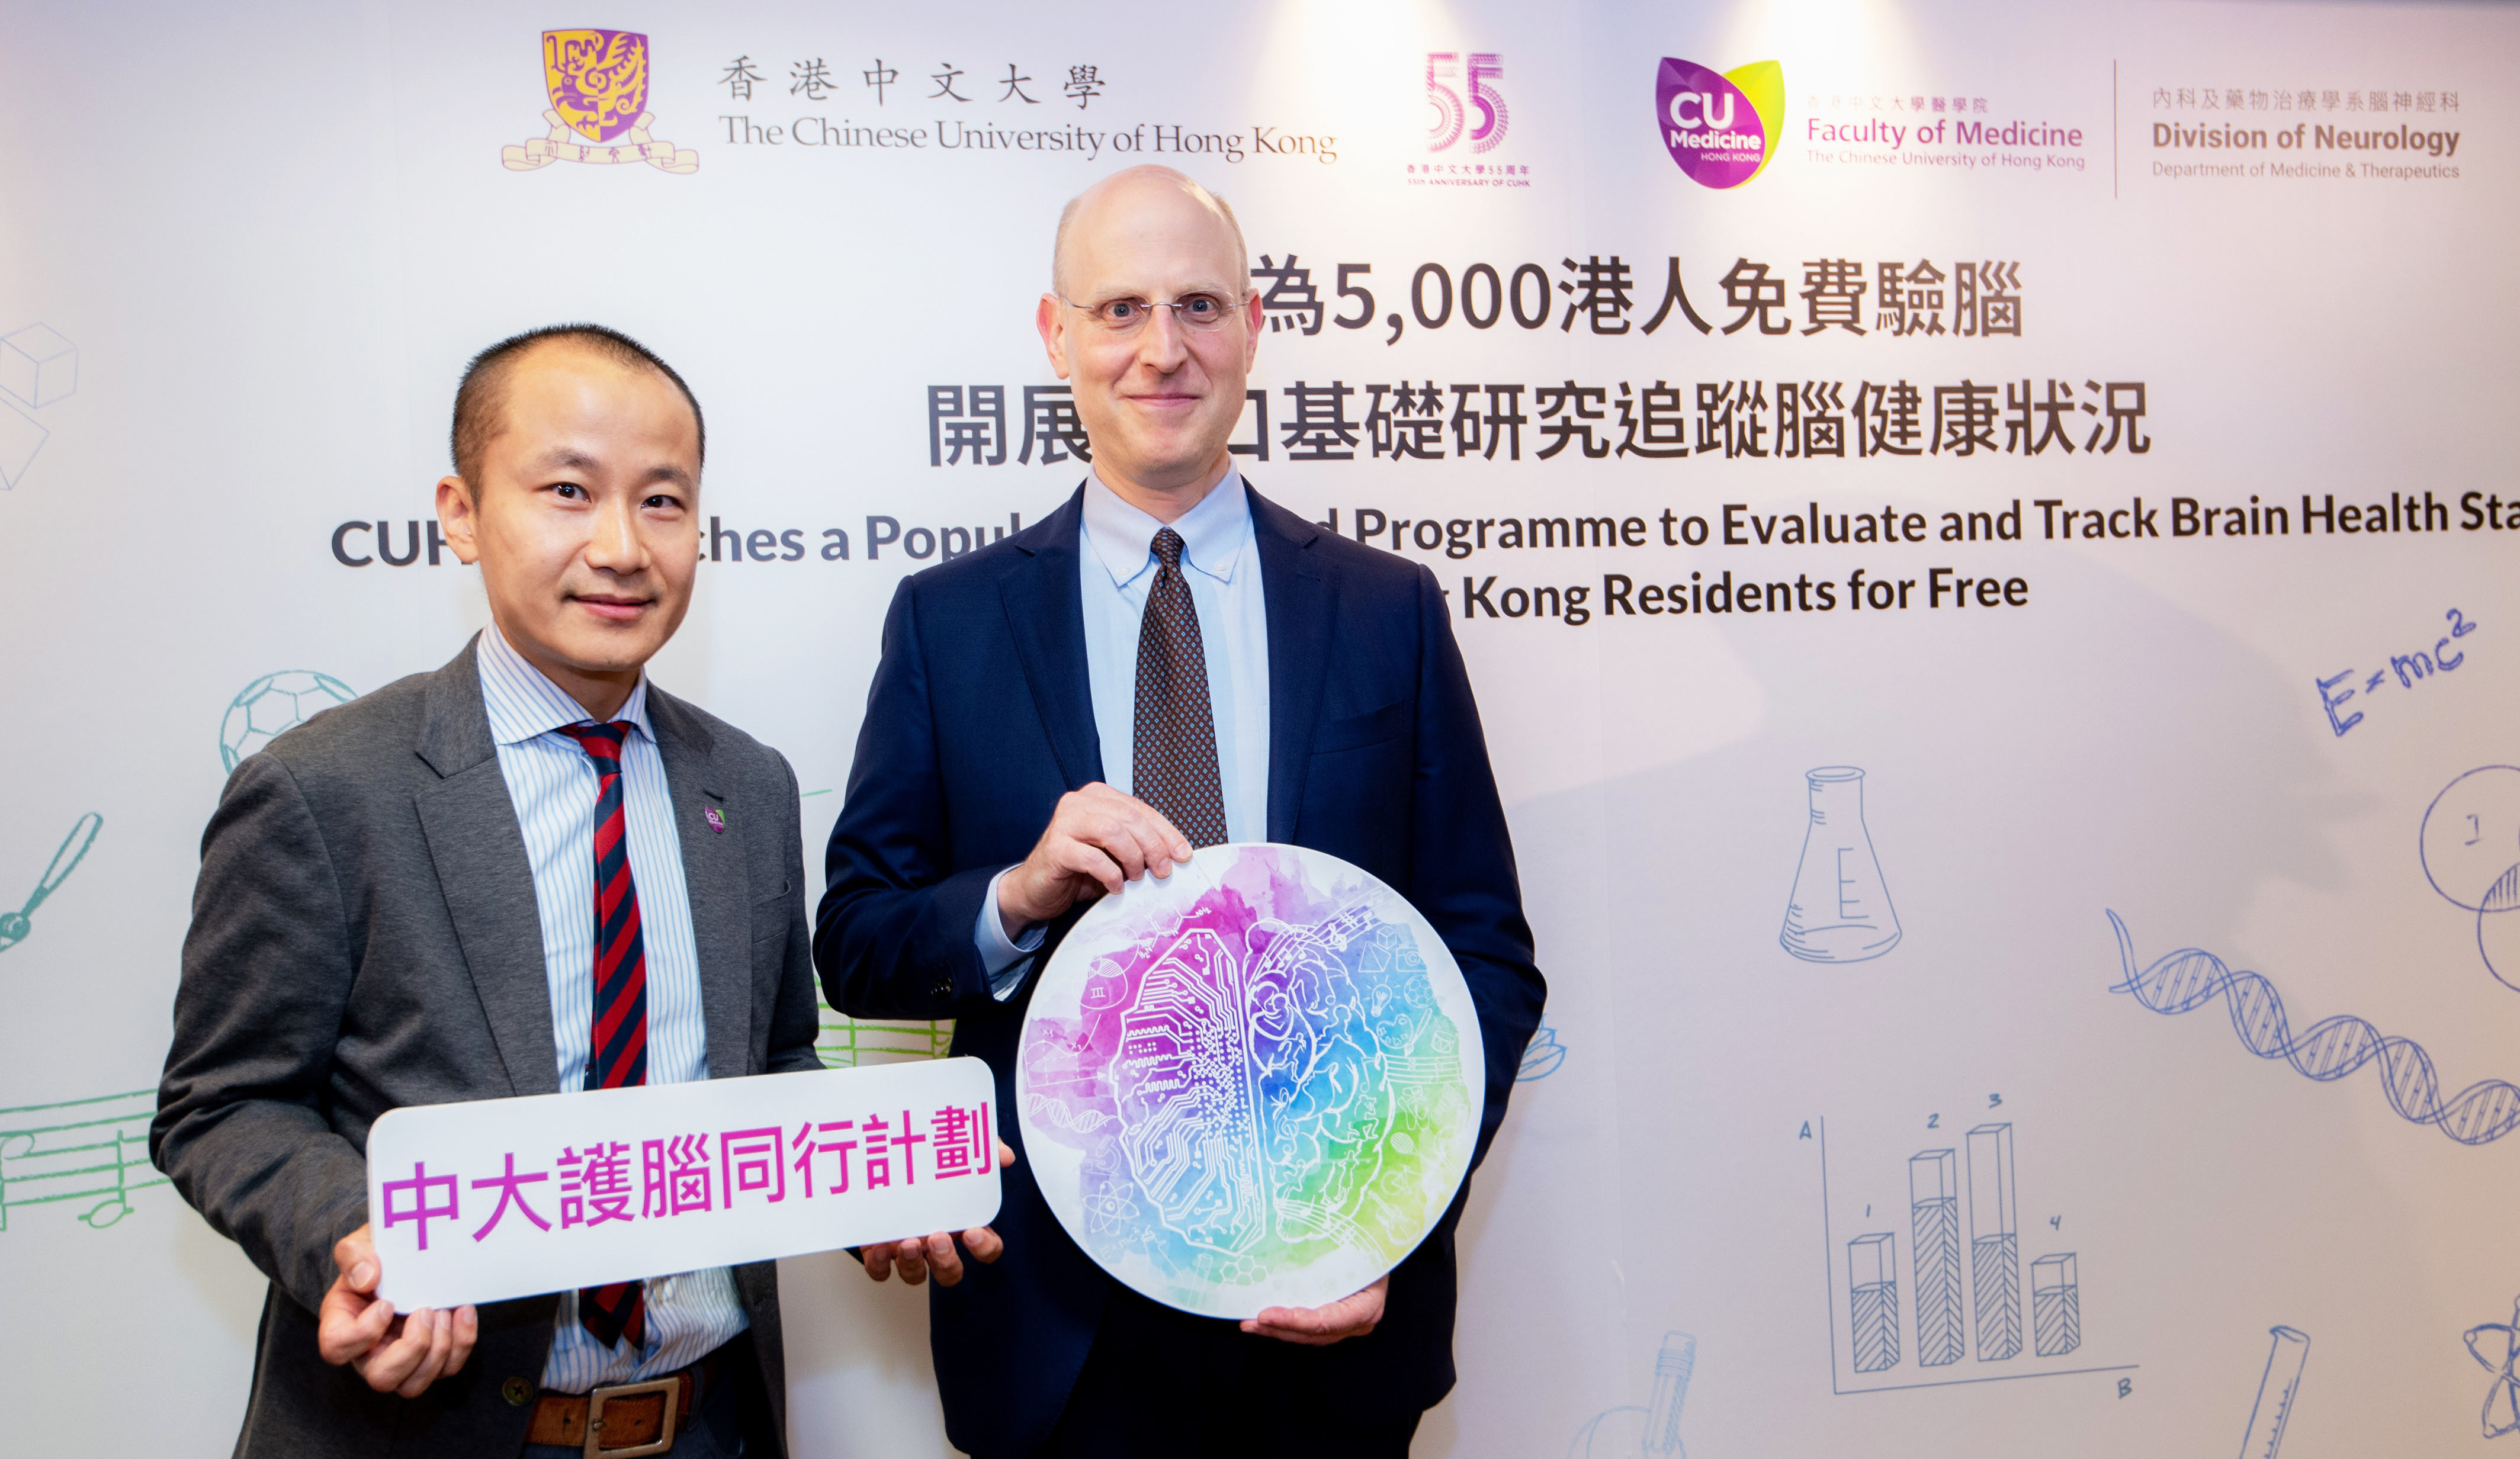 From left) Dr. Thomas LEUNG, Lee Quo Wei Associate Professor of Neurology, Department of Medicine and Therapeutics of the Faculty of Medicine at CUHK and Professor Jonathan ROSAND, the Co-founder and Co-director of the Henry and Allison McCance Center for Brain Health at Mass General